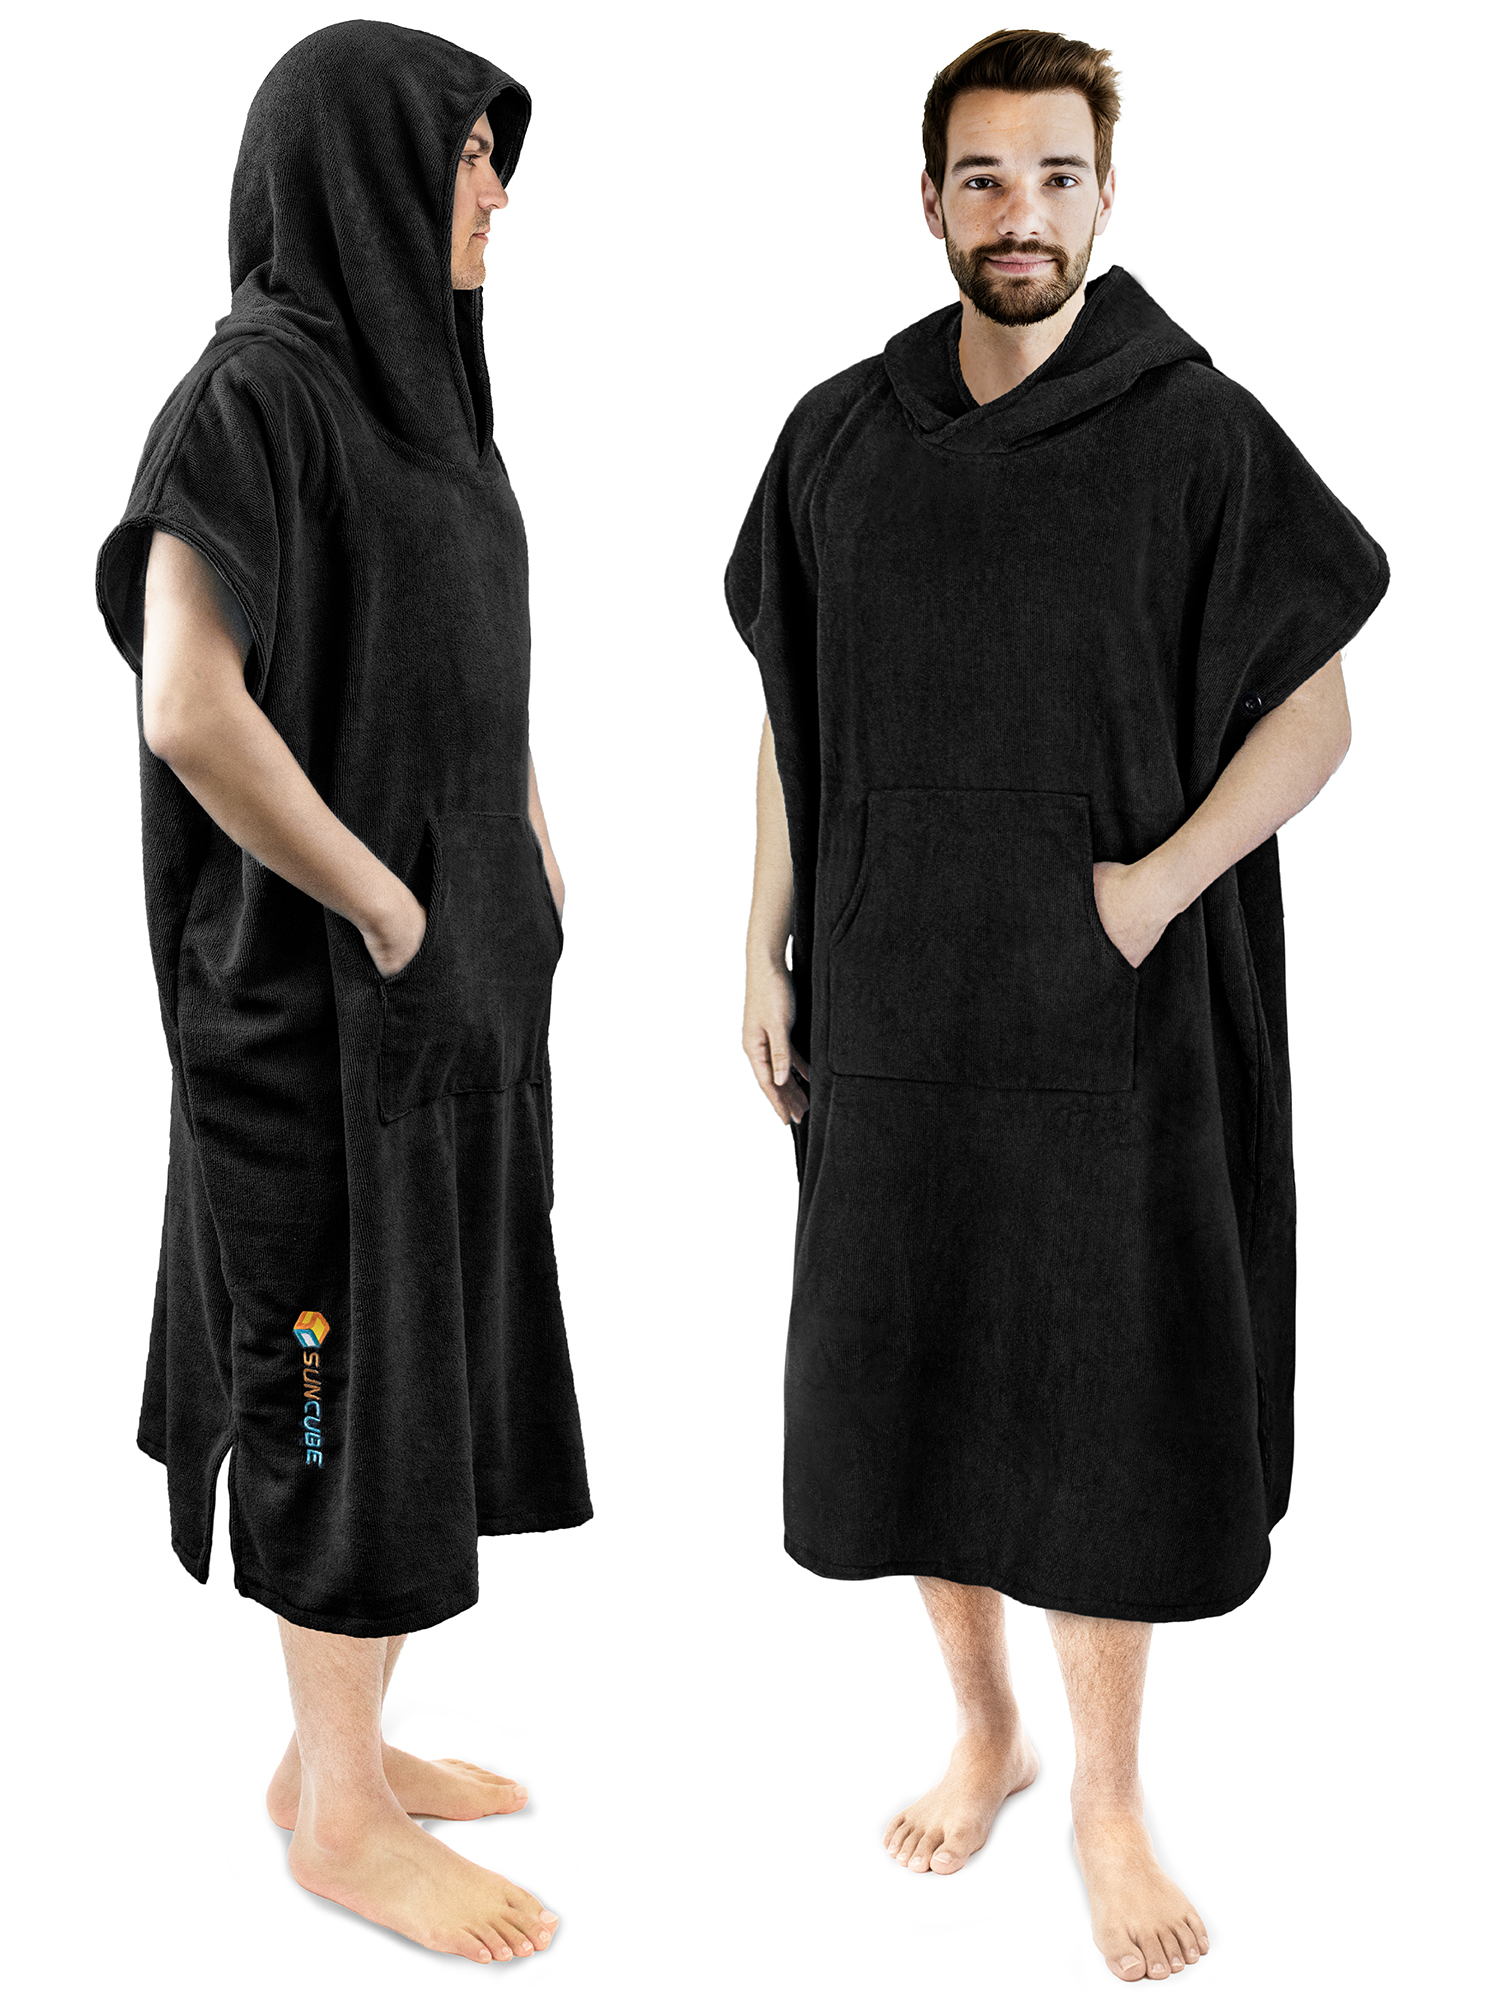 Hoody Towel - Hooded Surf Poncho for Men